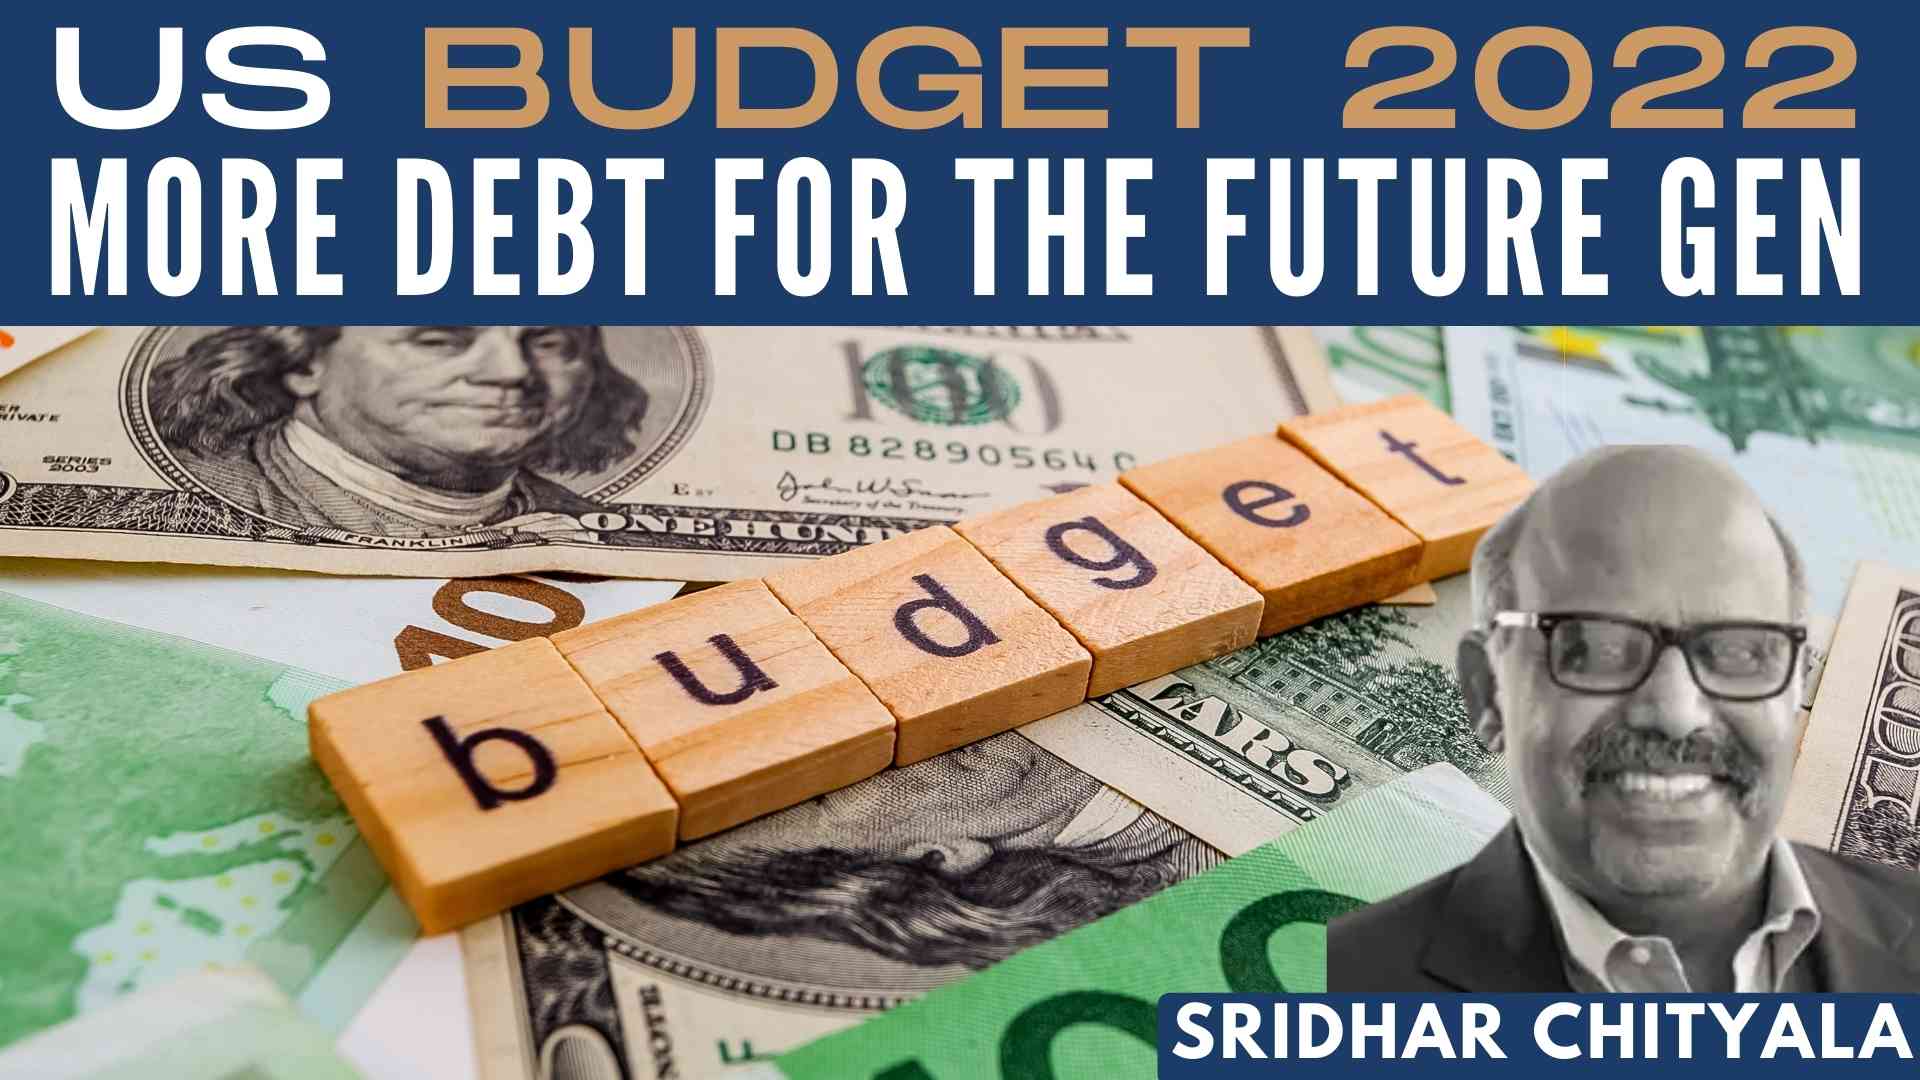 Even as the US comes out of the pandemic, the coming year's budget does more of the same; more earmarks, more debt & more pain. See the detailed analysis in this quick talk